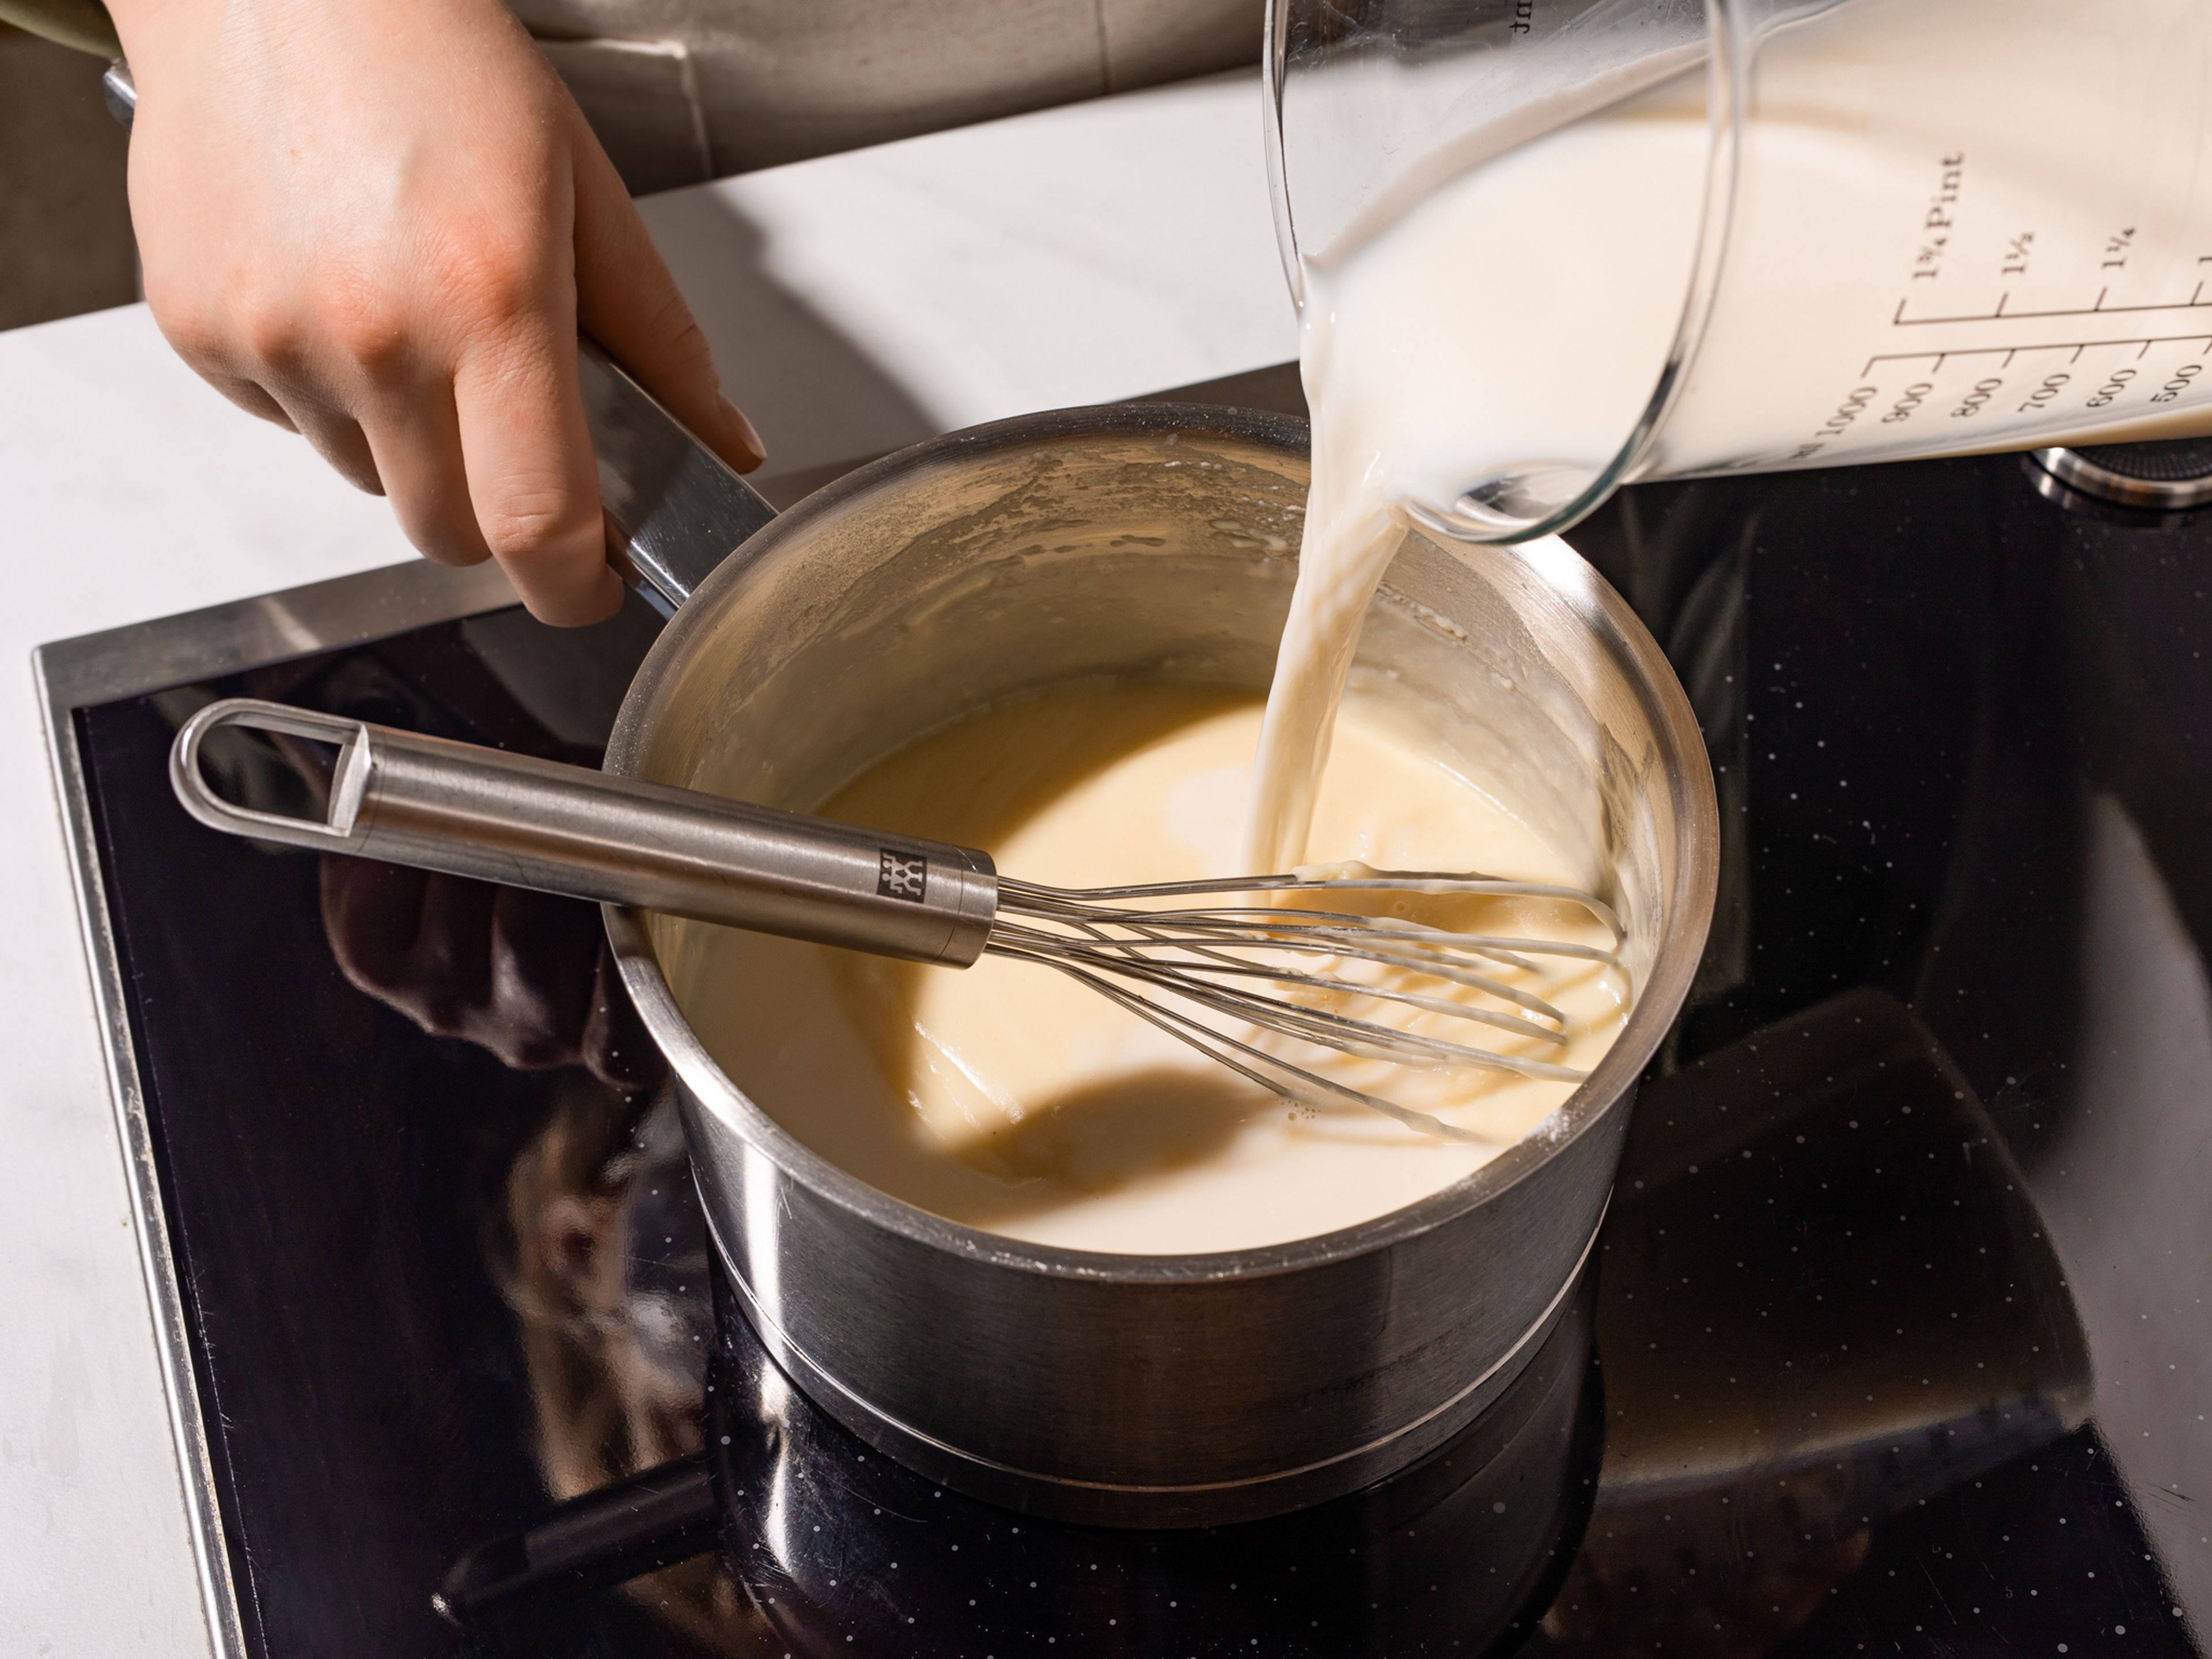 For the béchamel sauce, melt margarine in a small saucepan, add flour and whisk for approx. 1-2 min. Add a little almond milk, stirring, until the mixture is creamy and then gradually stir in remaining milk. Bring to a boil, until the sauce thickens and then season with salt and nutmeg.